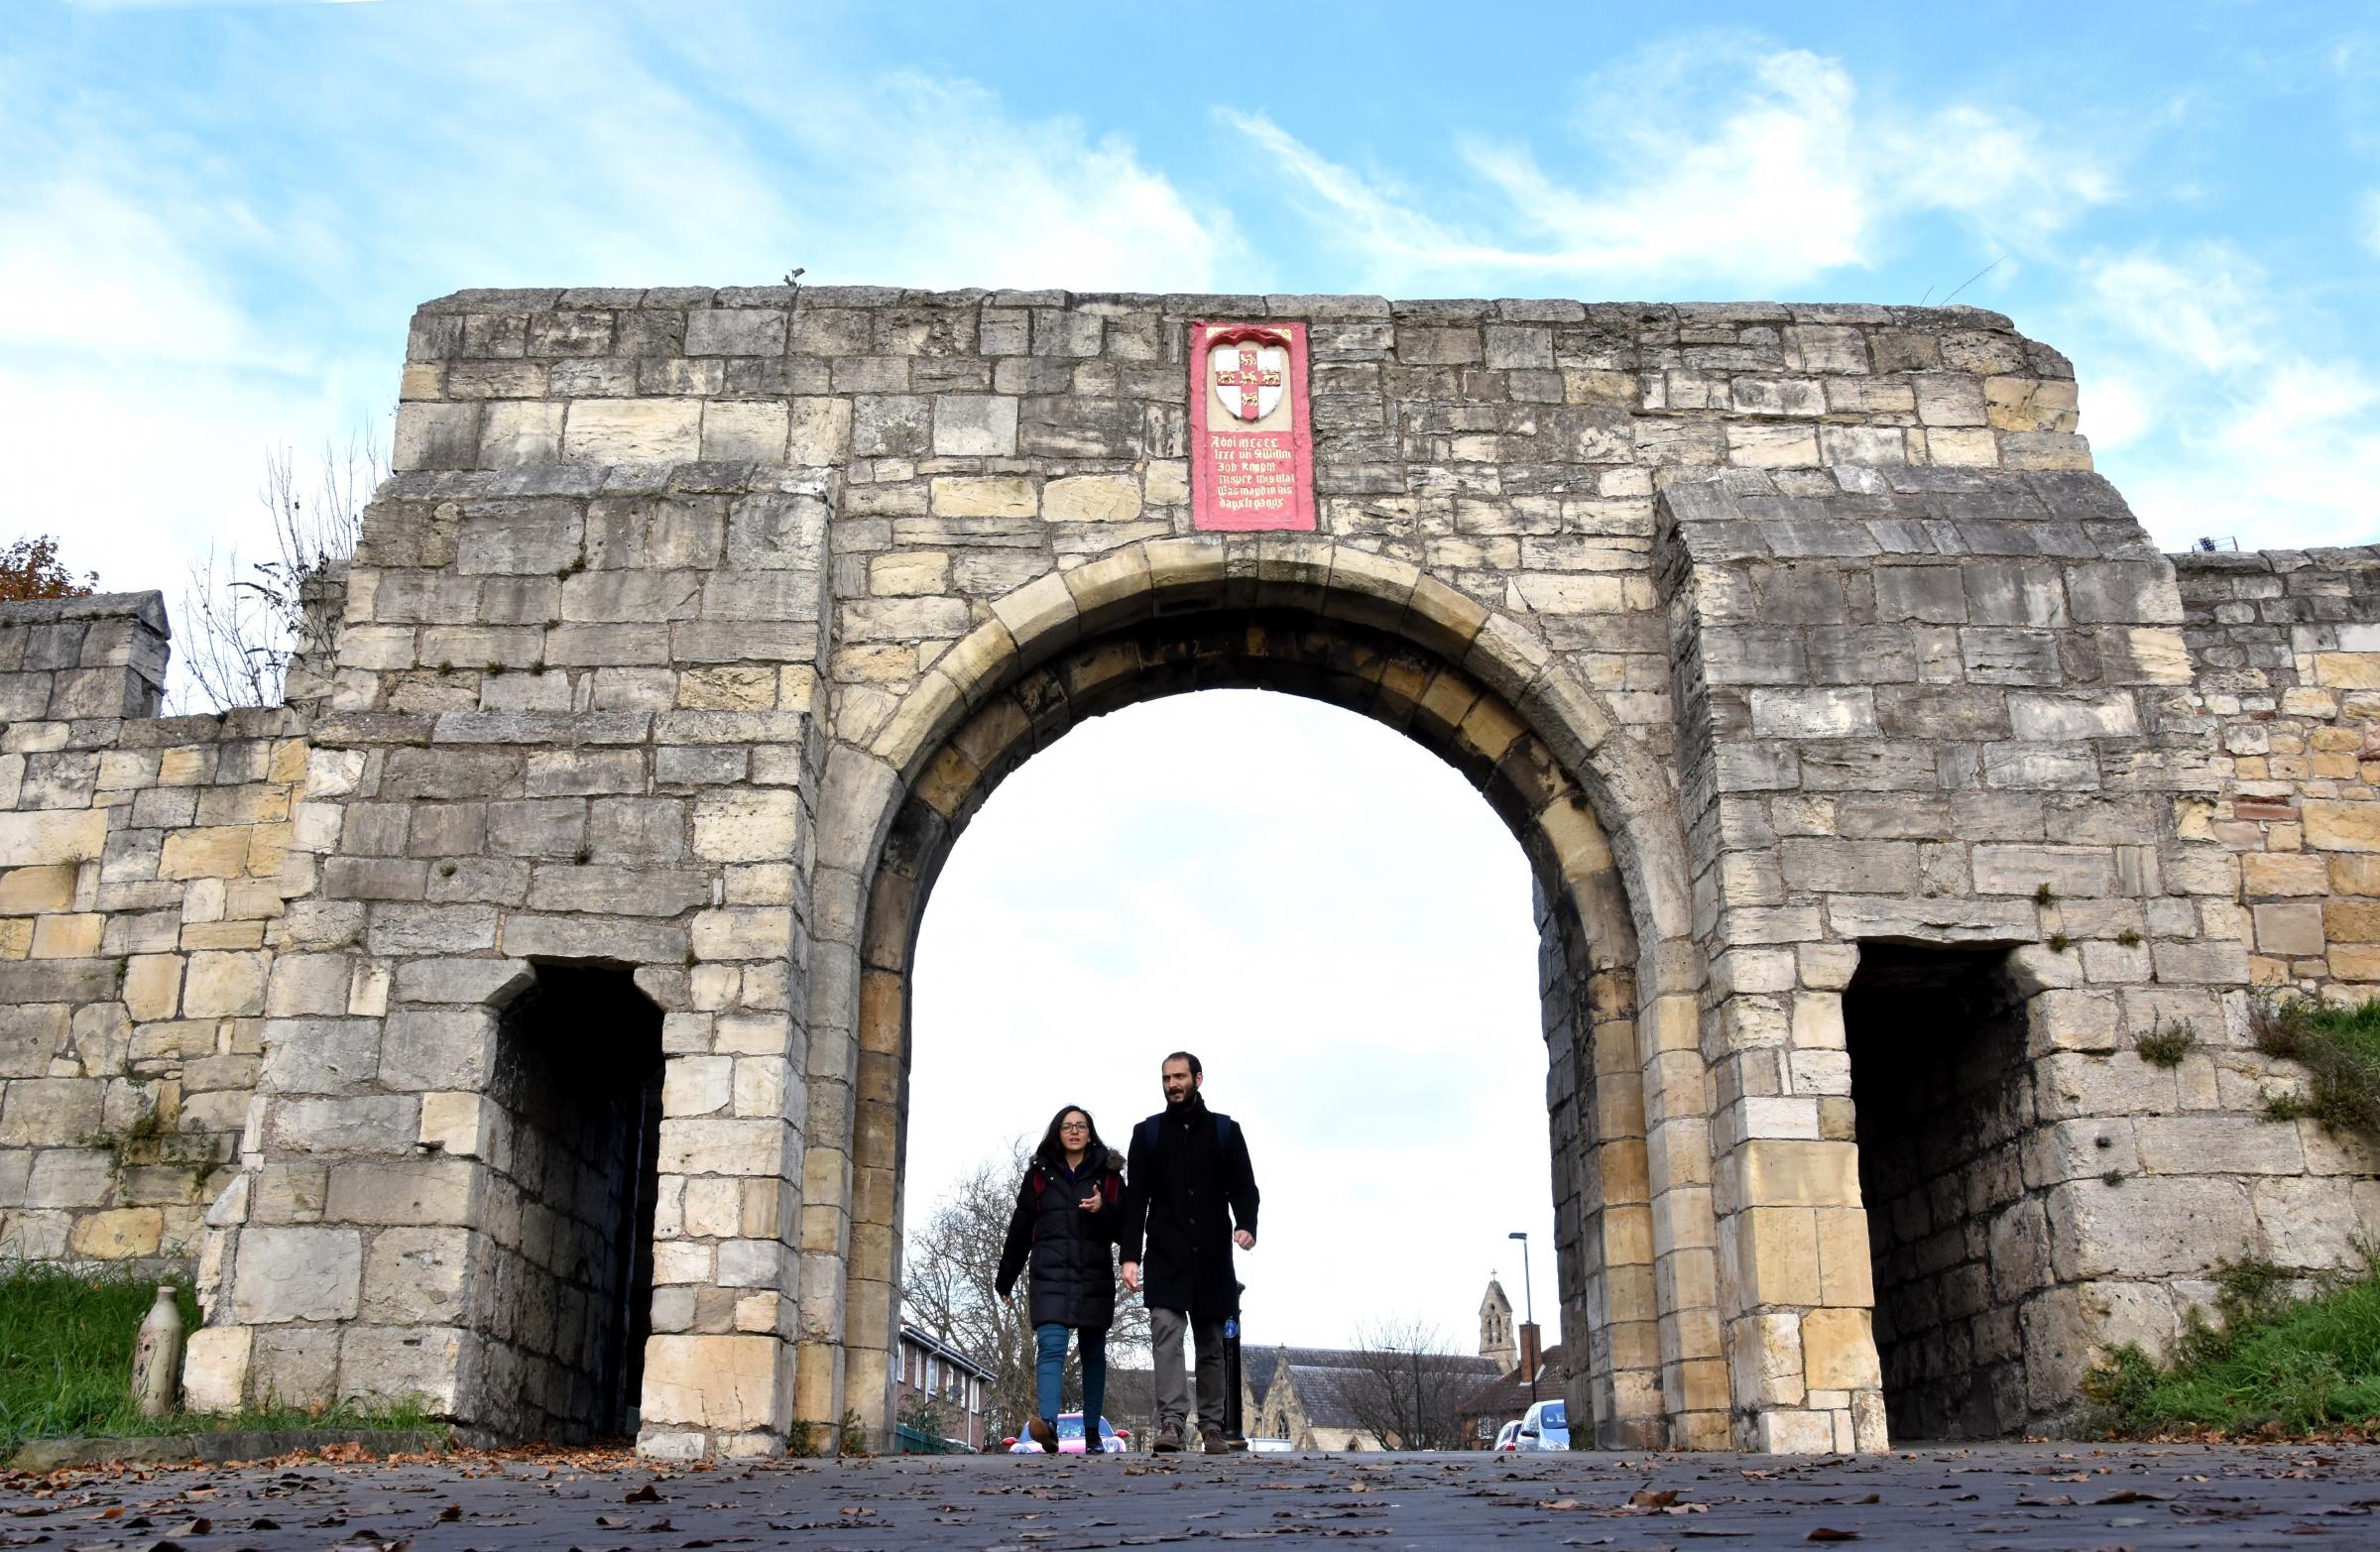 Our letter writer says York is not fit to receive tourists yet - it needs sprucing up